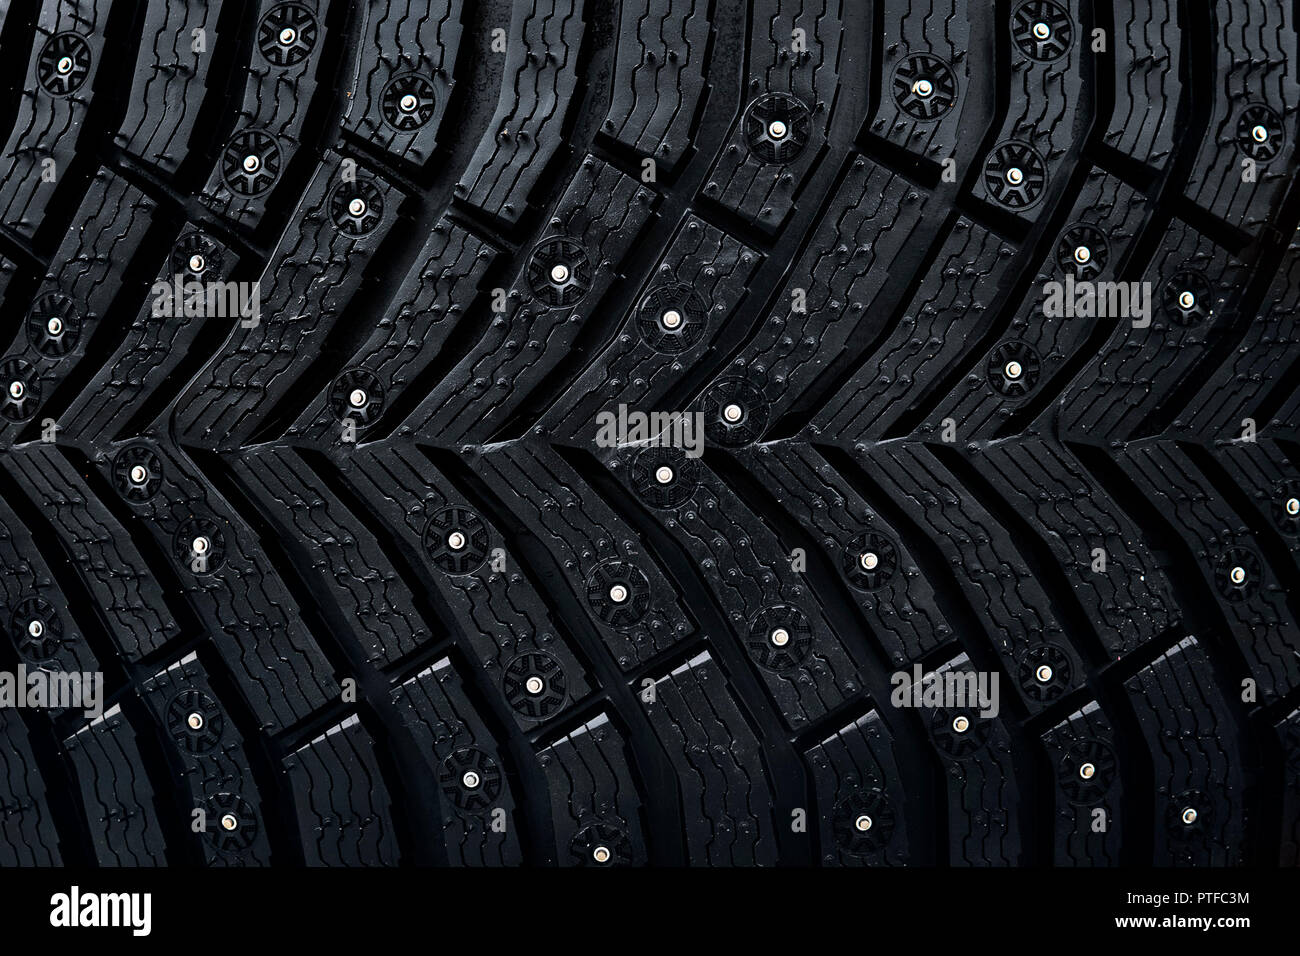 Wheel tire seamless pattern. A close up of a tire protector and studs. Winter tyre texture. Realistic illustration. Black rubber, studs and protector  Stock Photo